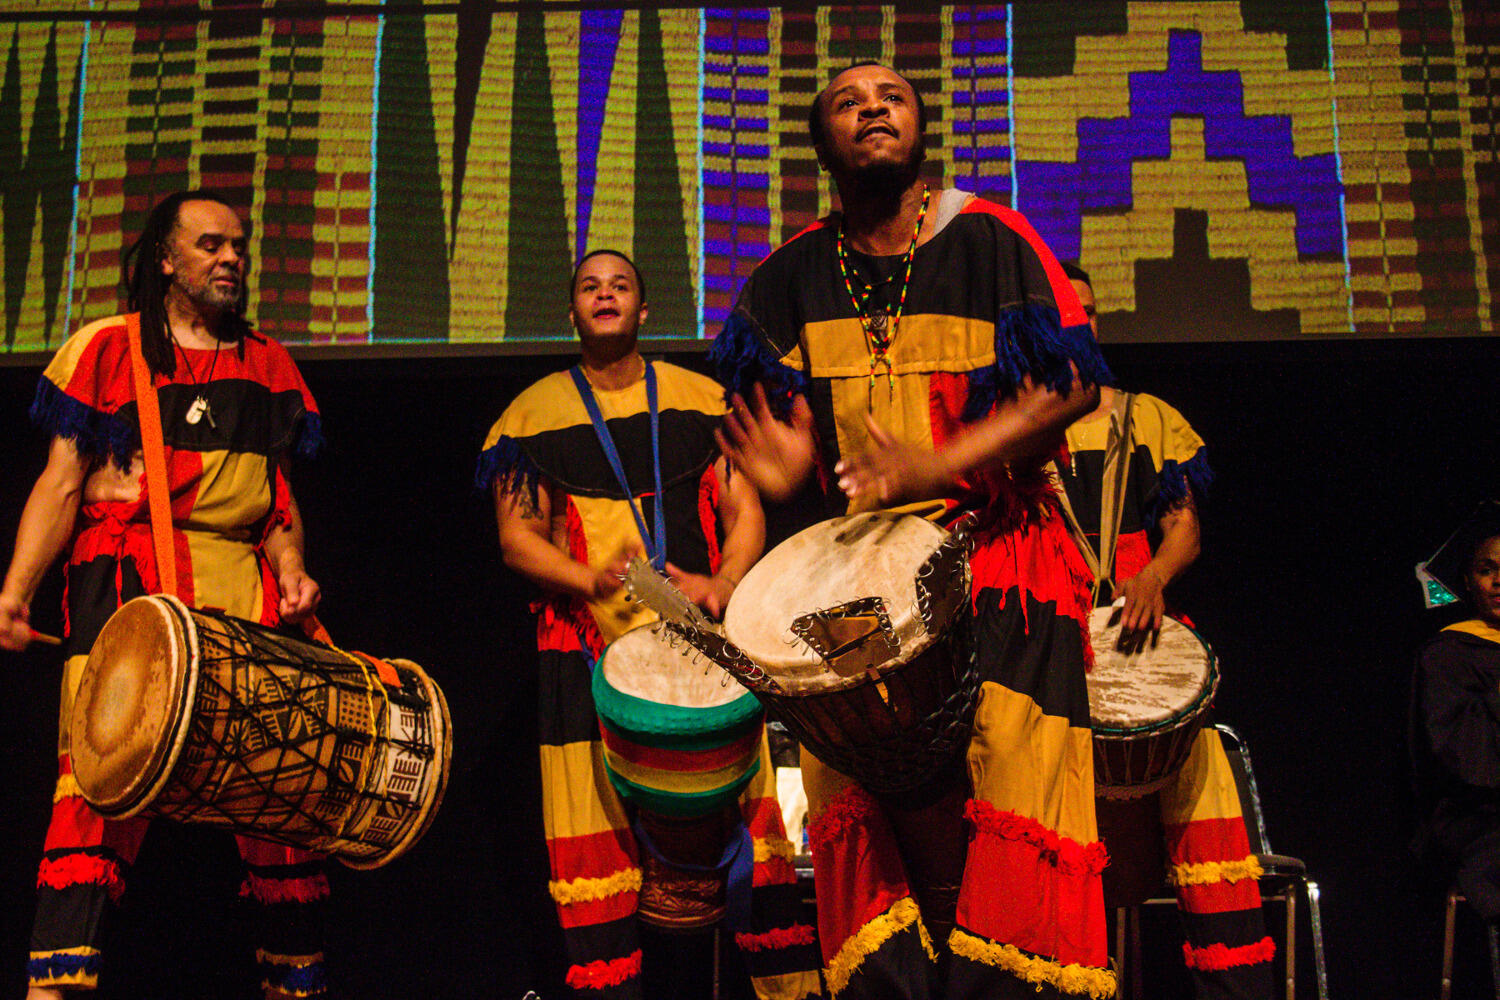 A drum performance by the Elegba Folklore Society. Photo by Nick Vega.